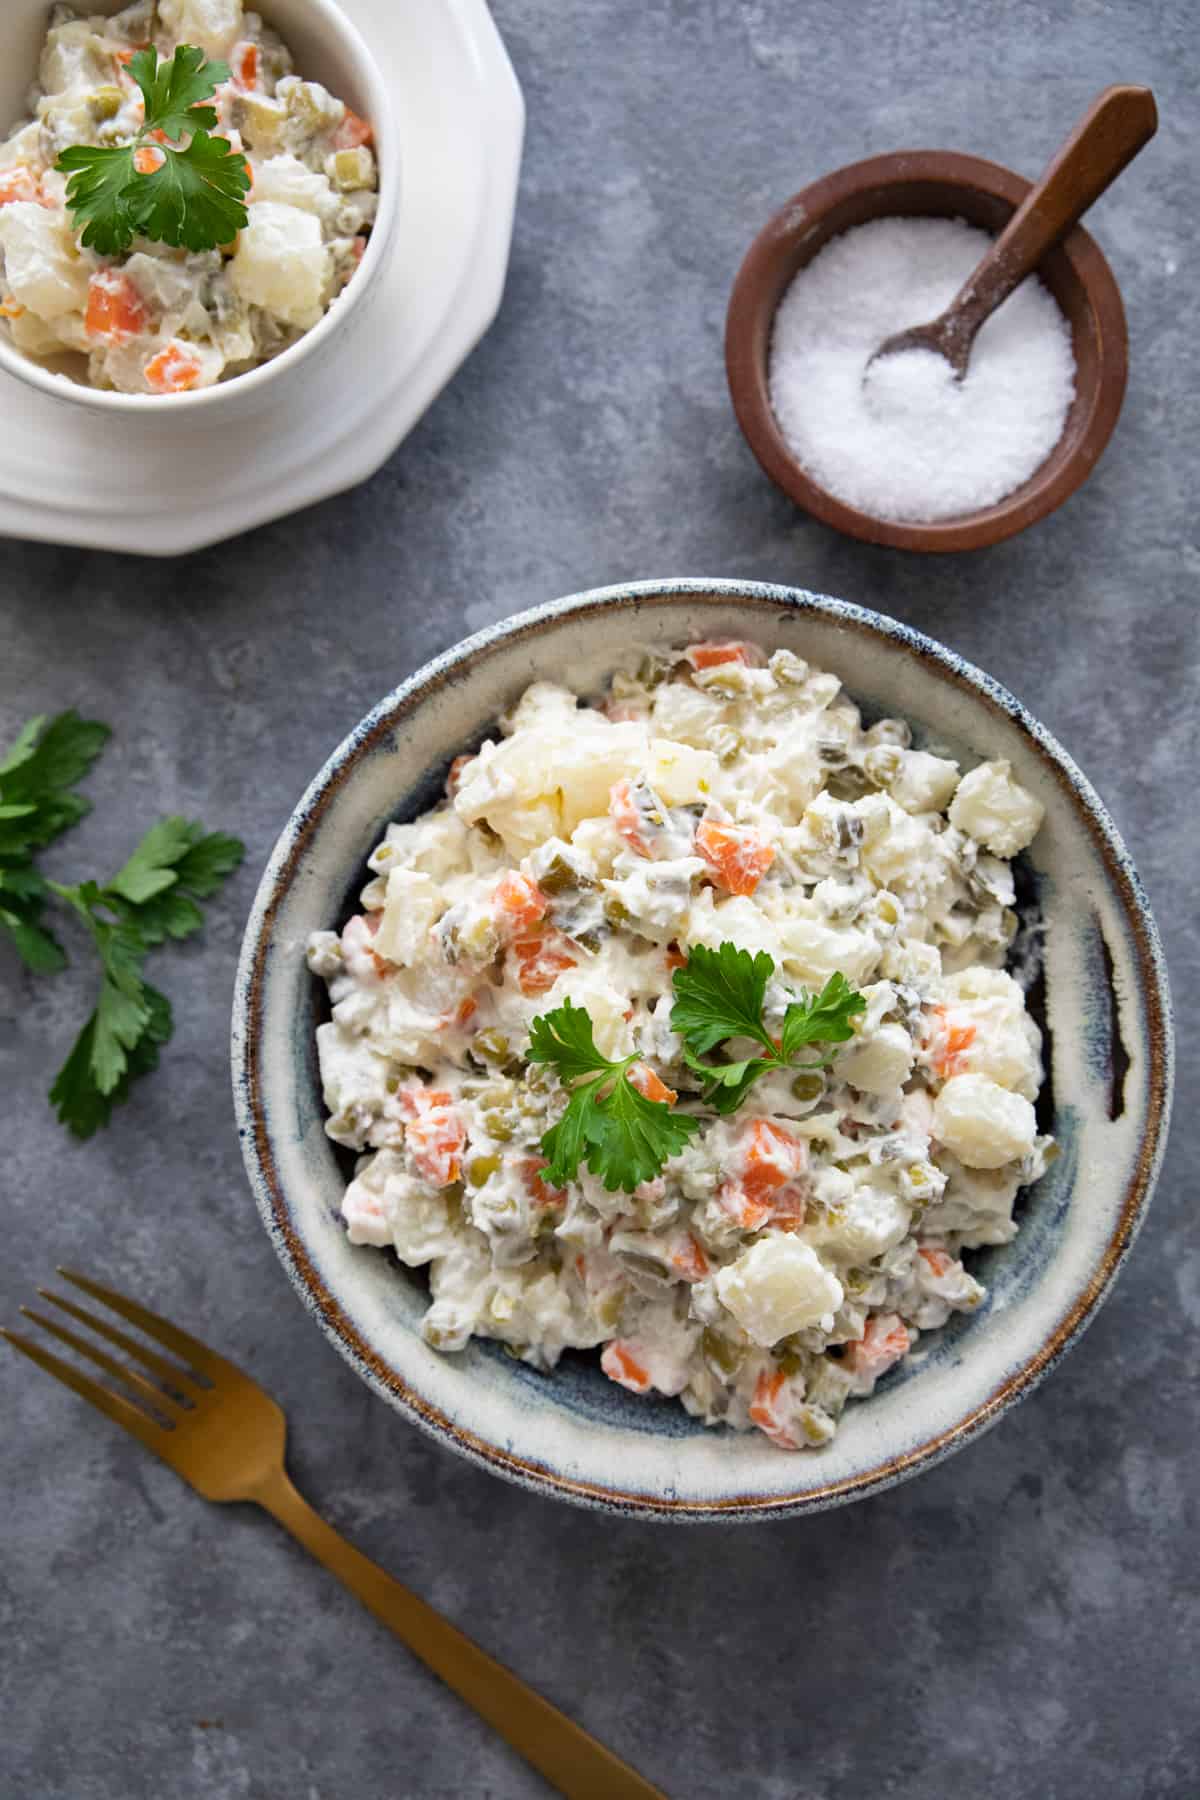 two bowls of ensalata rusa known as olivier salad or Russian salad.